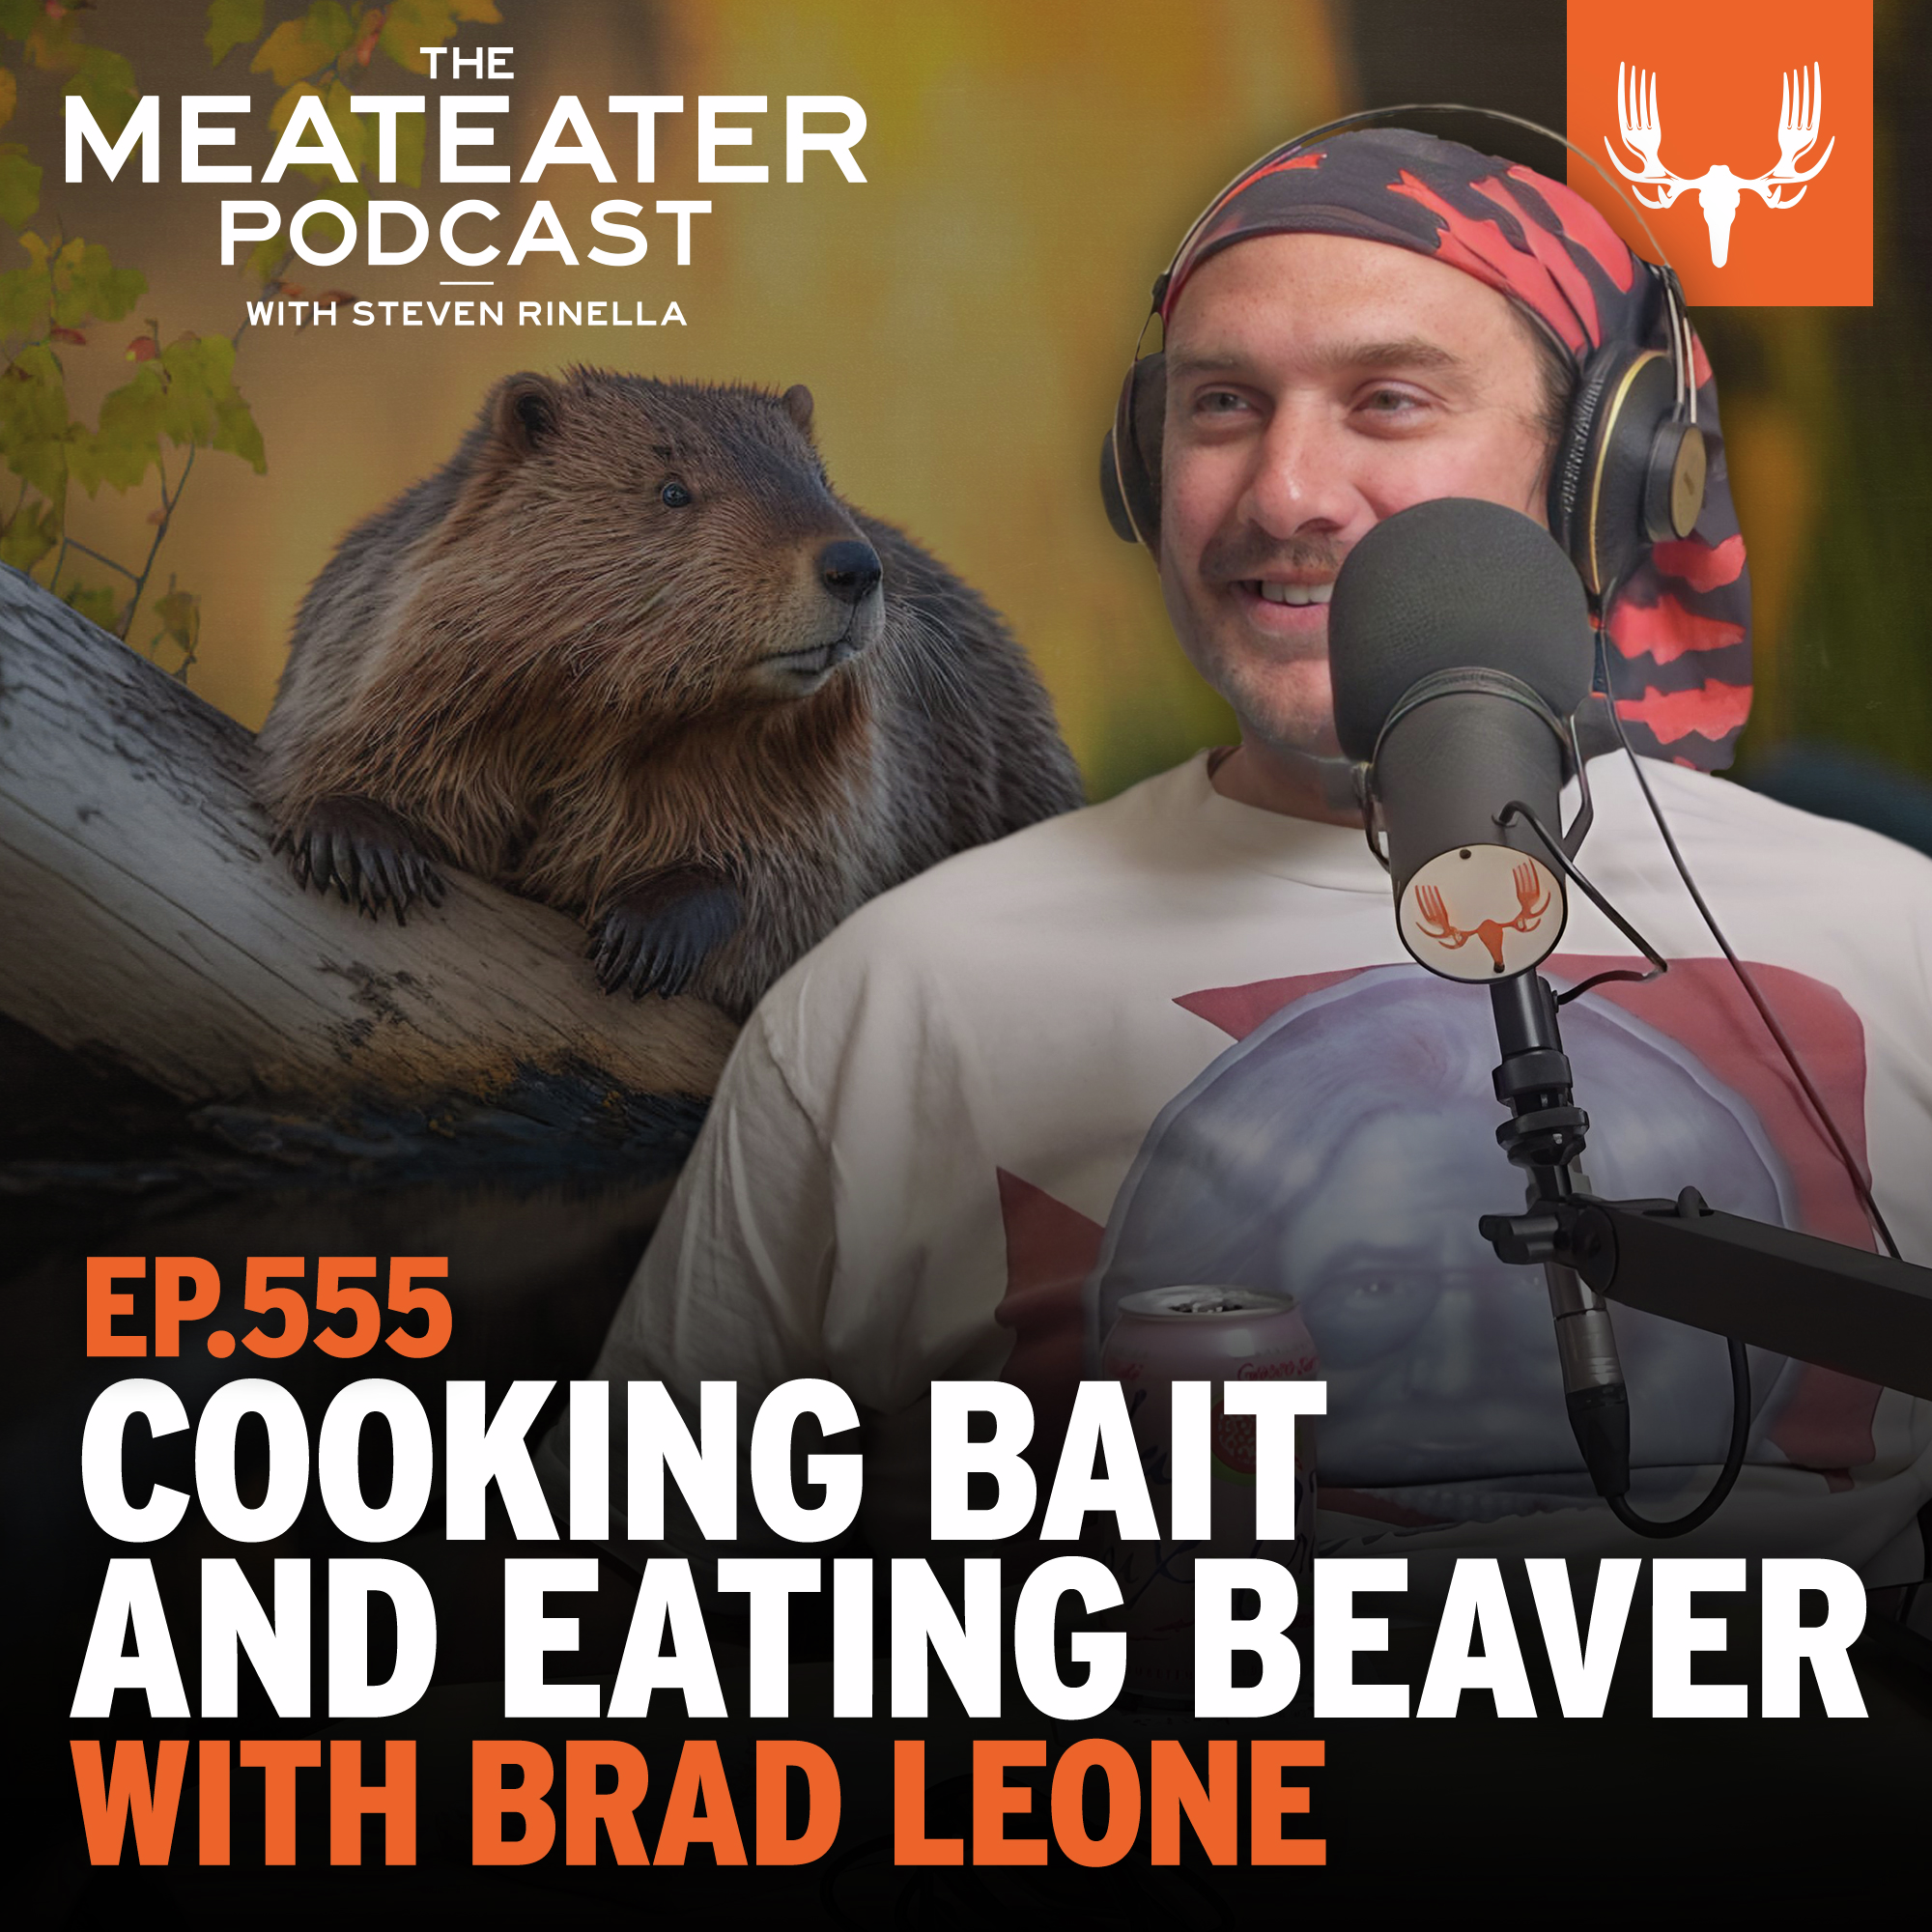 Ep. 555: Cooking Beaver and Aging Fish with Brad Leone